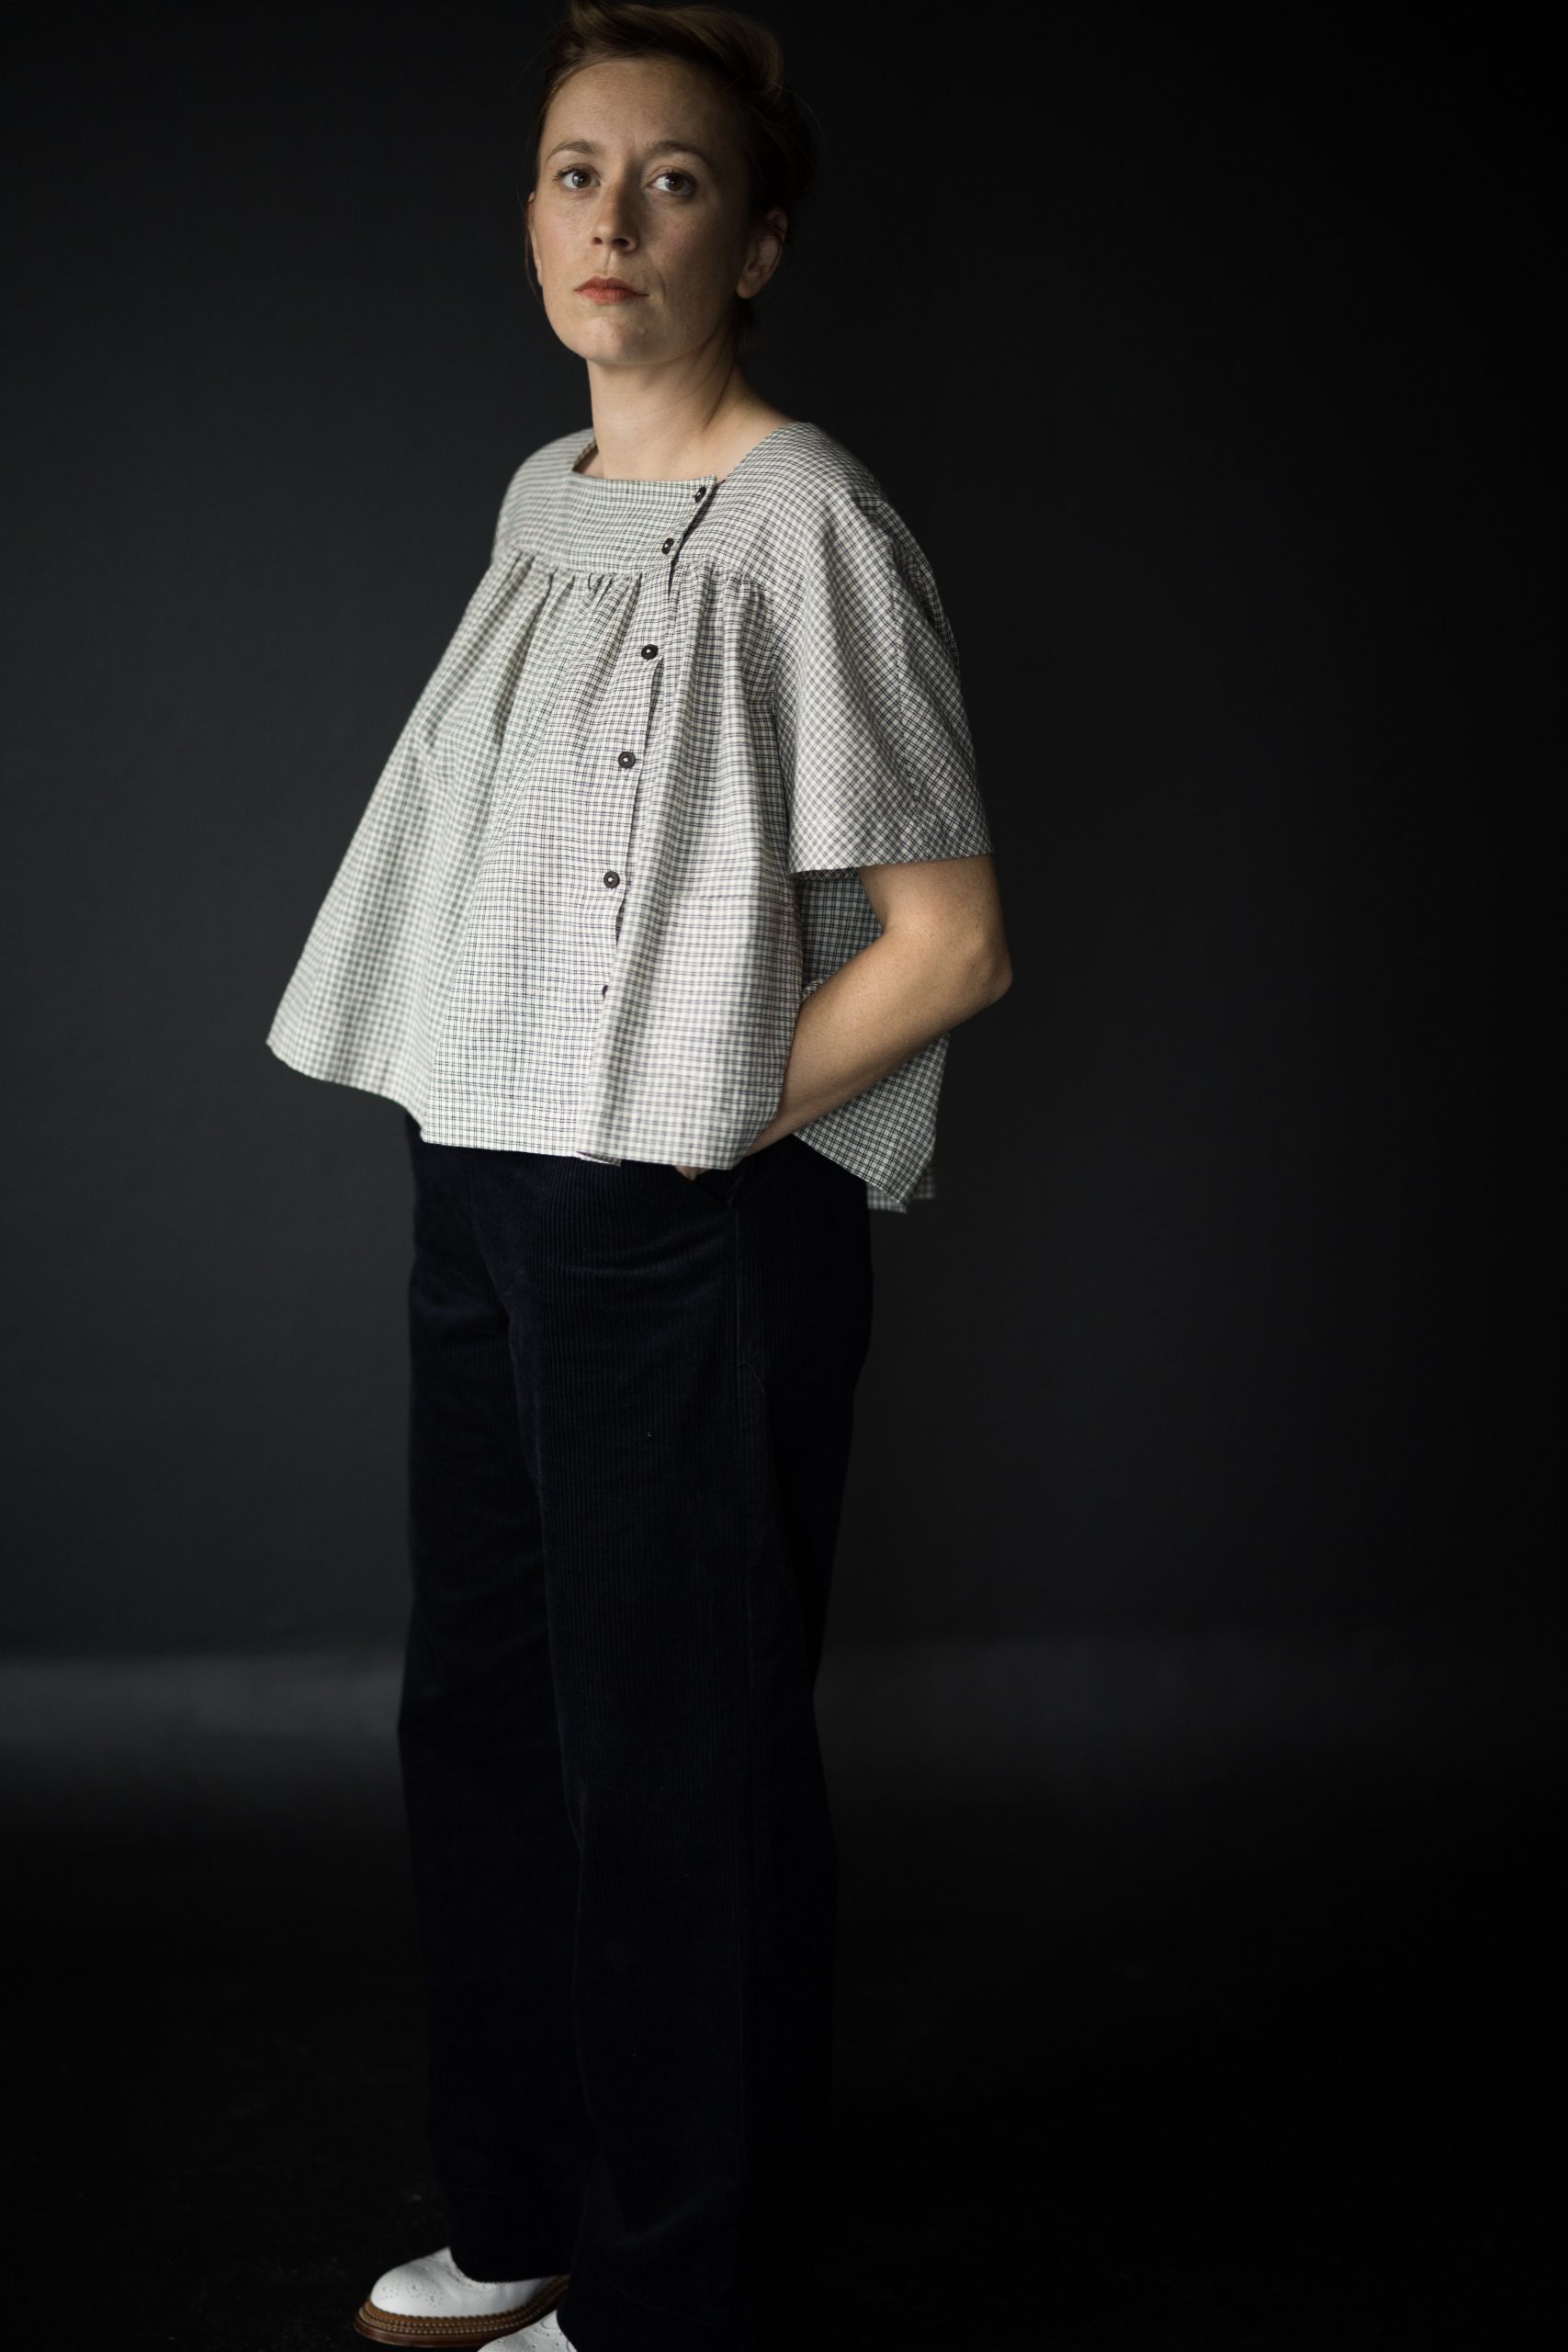 Woman wearing the The Omilie Top sewing pattern from Merchant & Mills on The Fold Line. A top pattern made in linen, brushed cotton, cotton lawn, cotton poplin, tencel, Indian handlooms, linen or cotton double gauze fabrics, featuring a smock style, patch pockets, square neck, short sleeves and off centre front button closure.